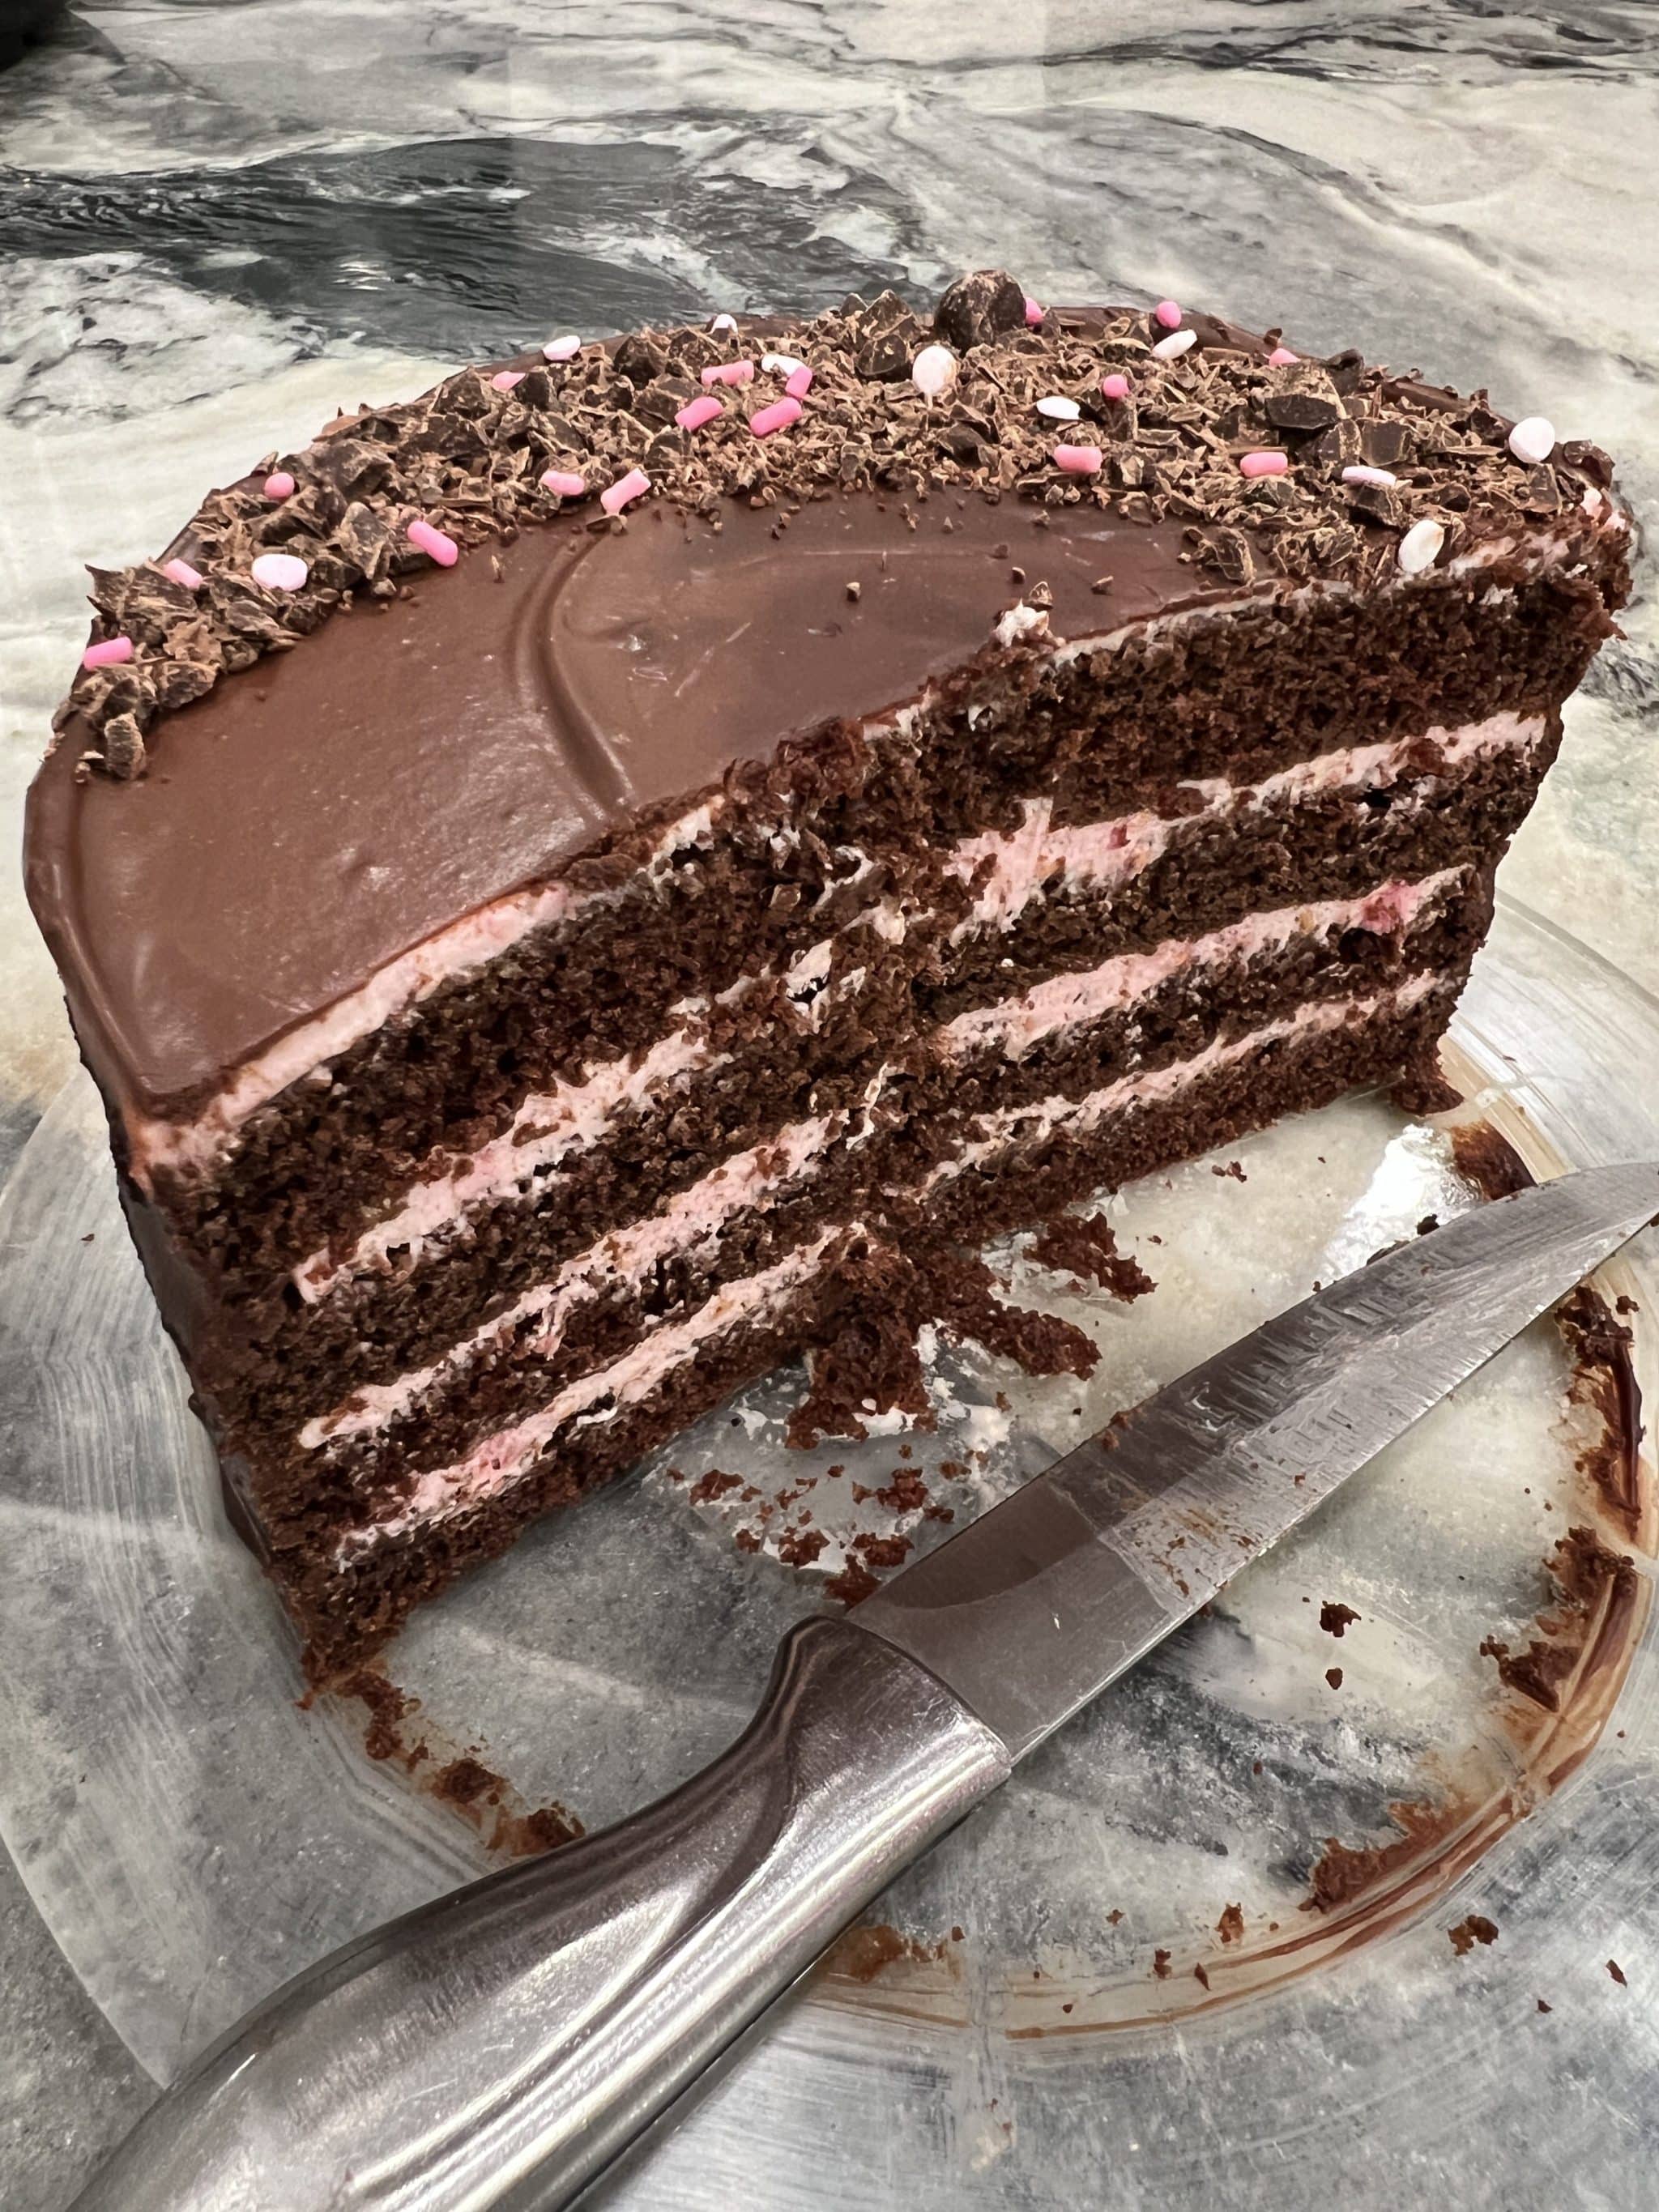 birthday cake: chocolate cake layers with whipped raspberry filling topped with chocolate ganache and chocolate shavings